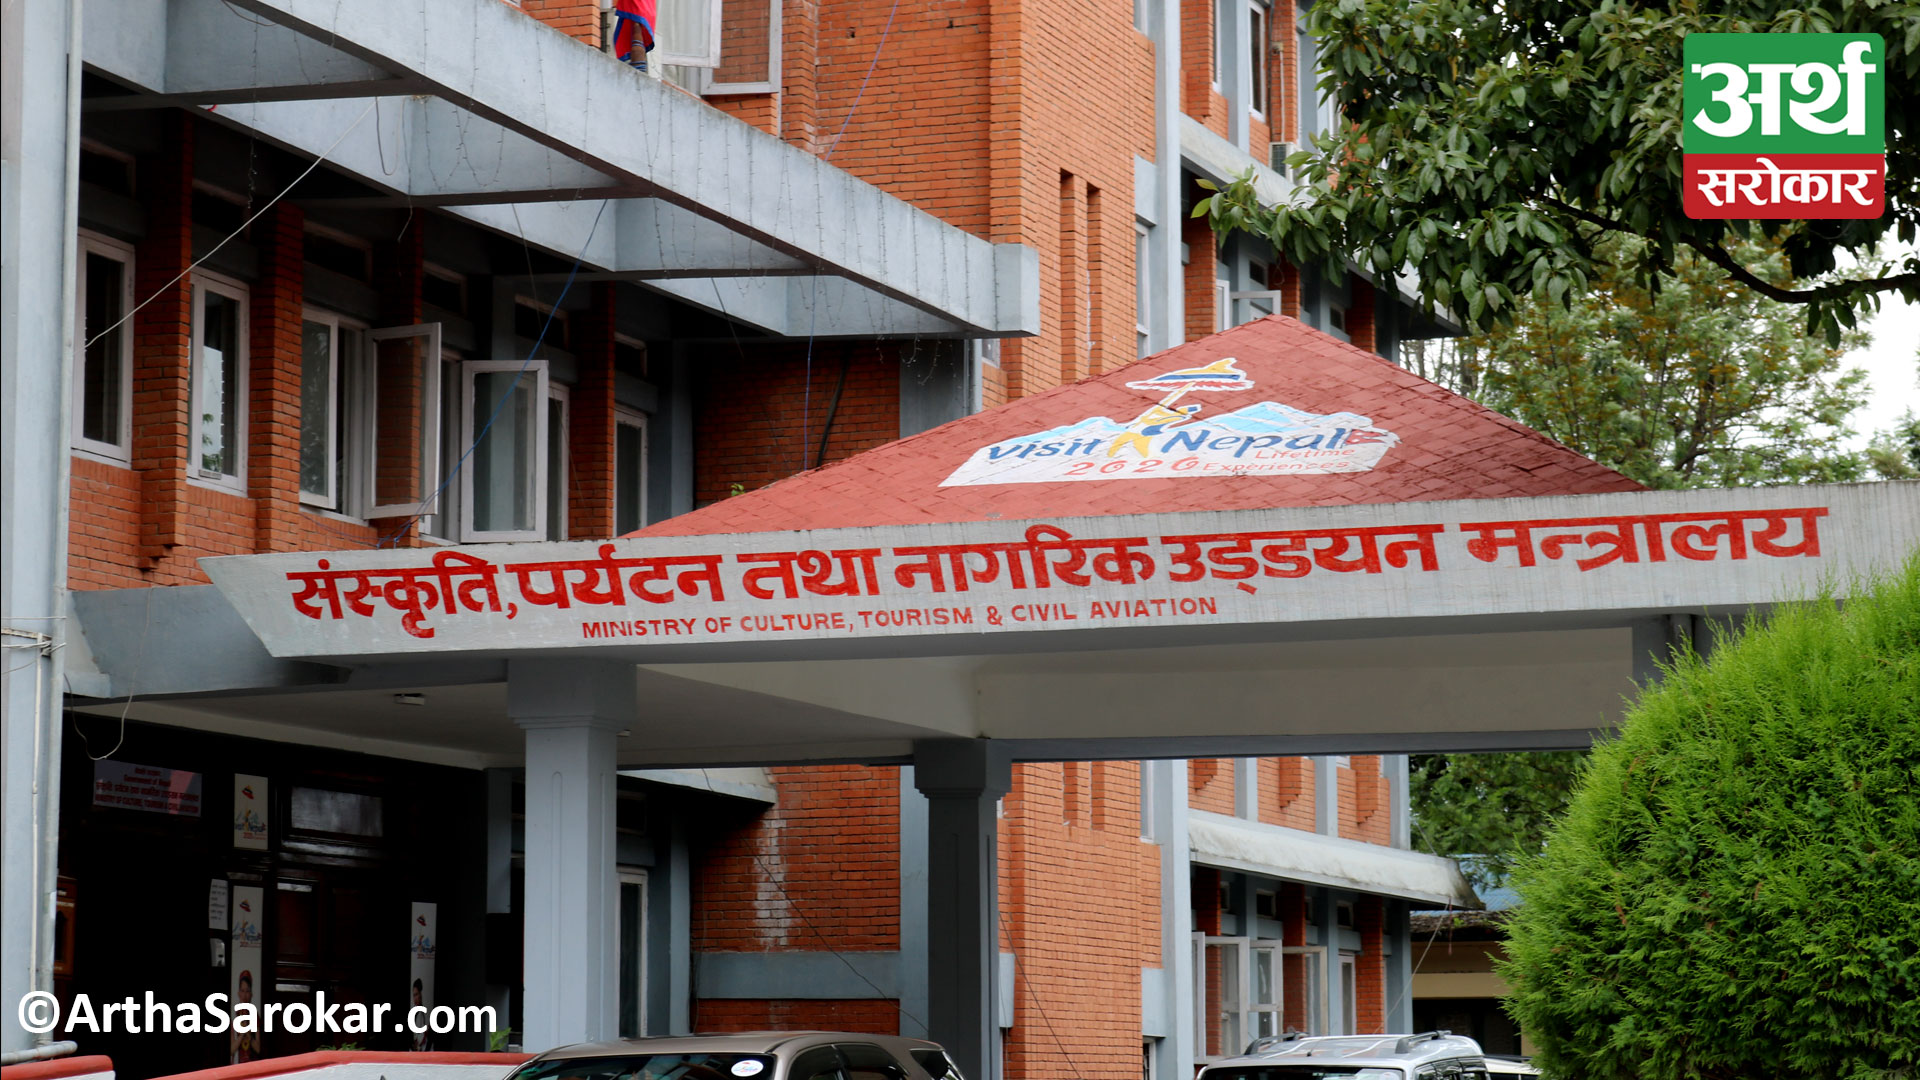 Nepal is preparing for bilateral air service agreements with three nations, including Switzerland